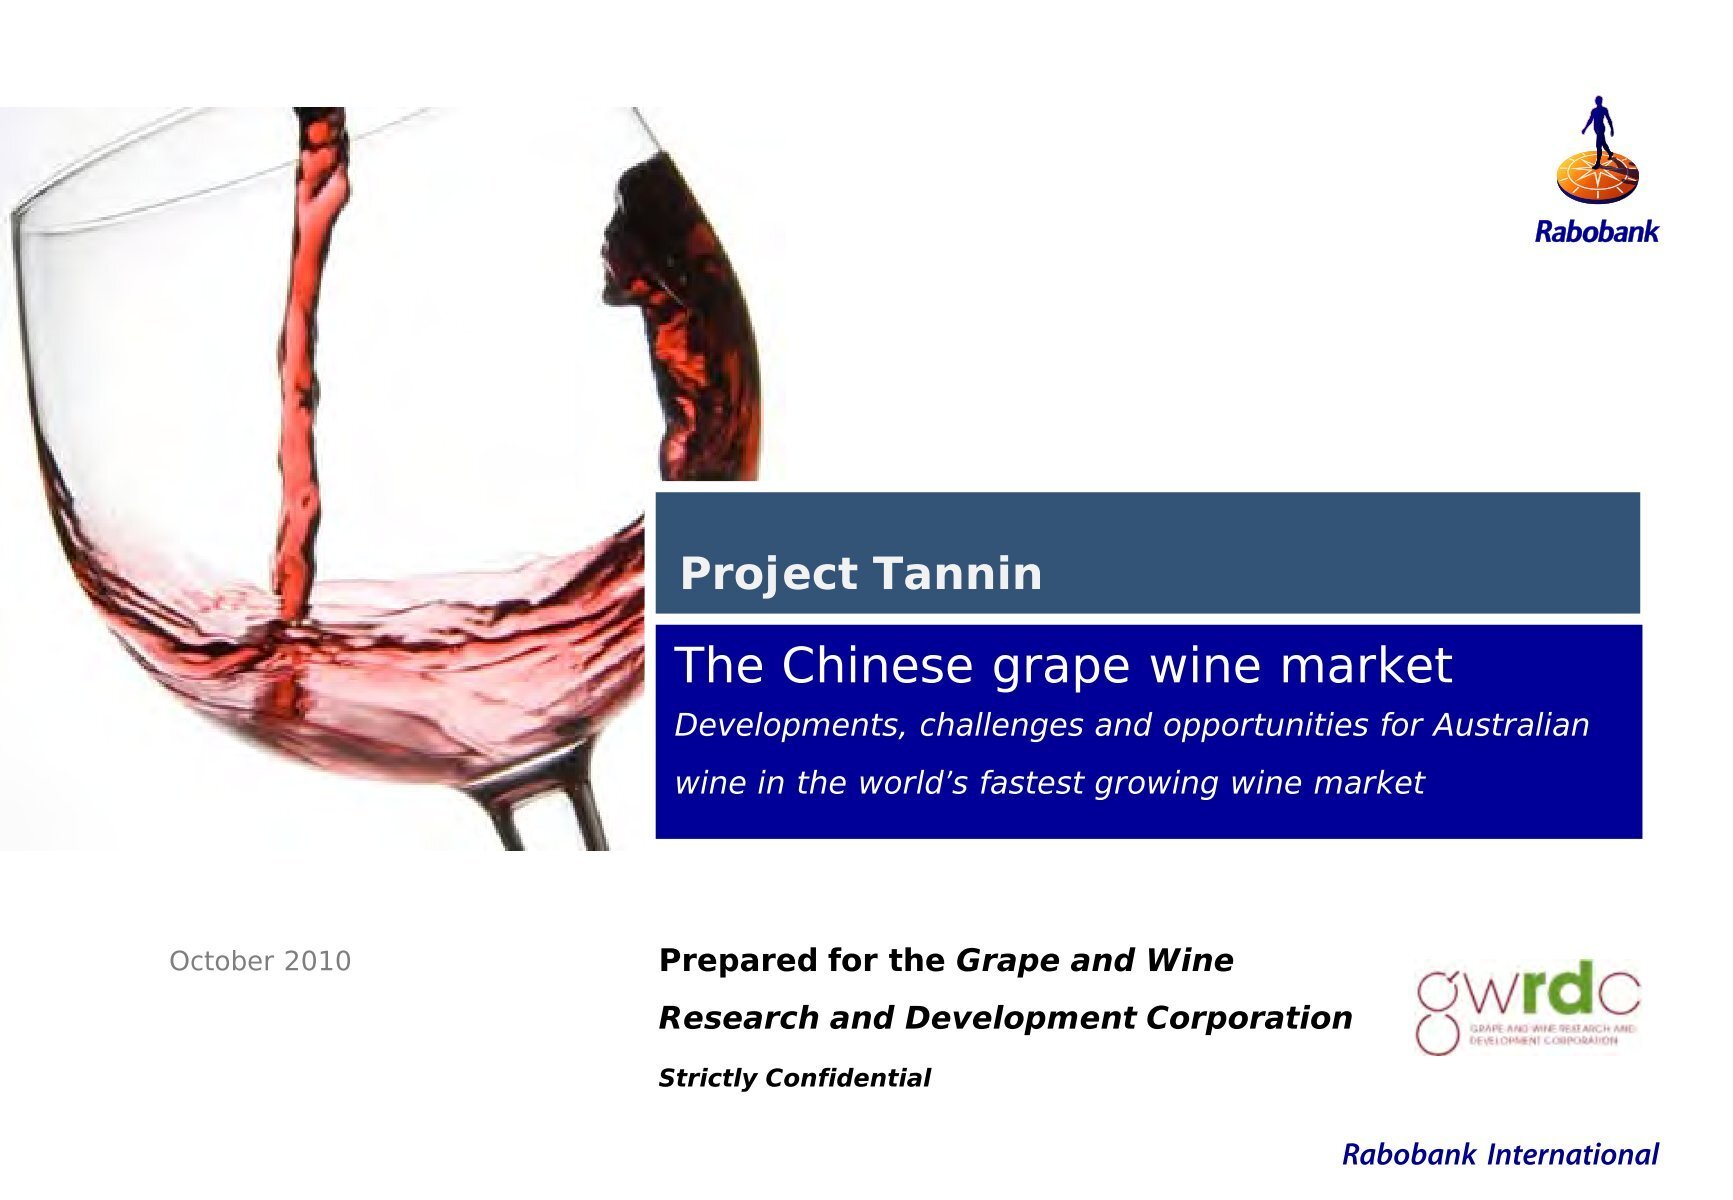 Development Wine - and Grape Corporation continued Research and